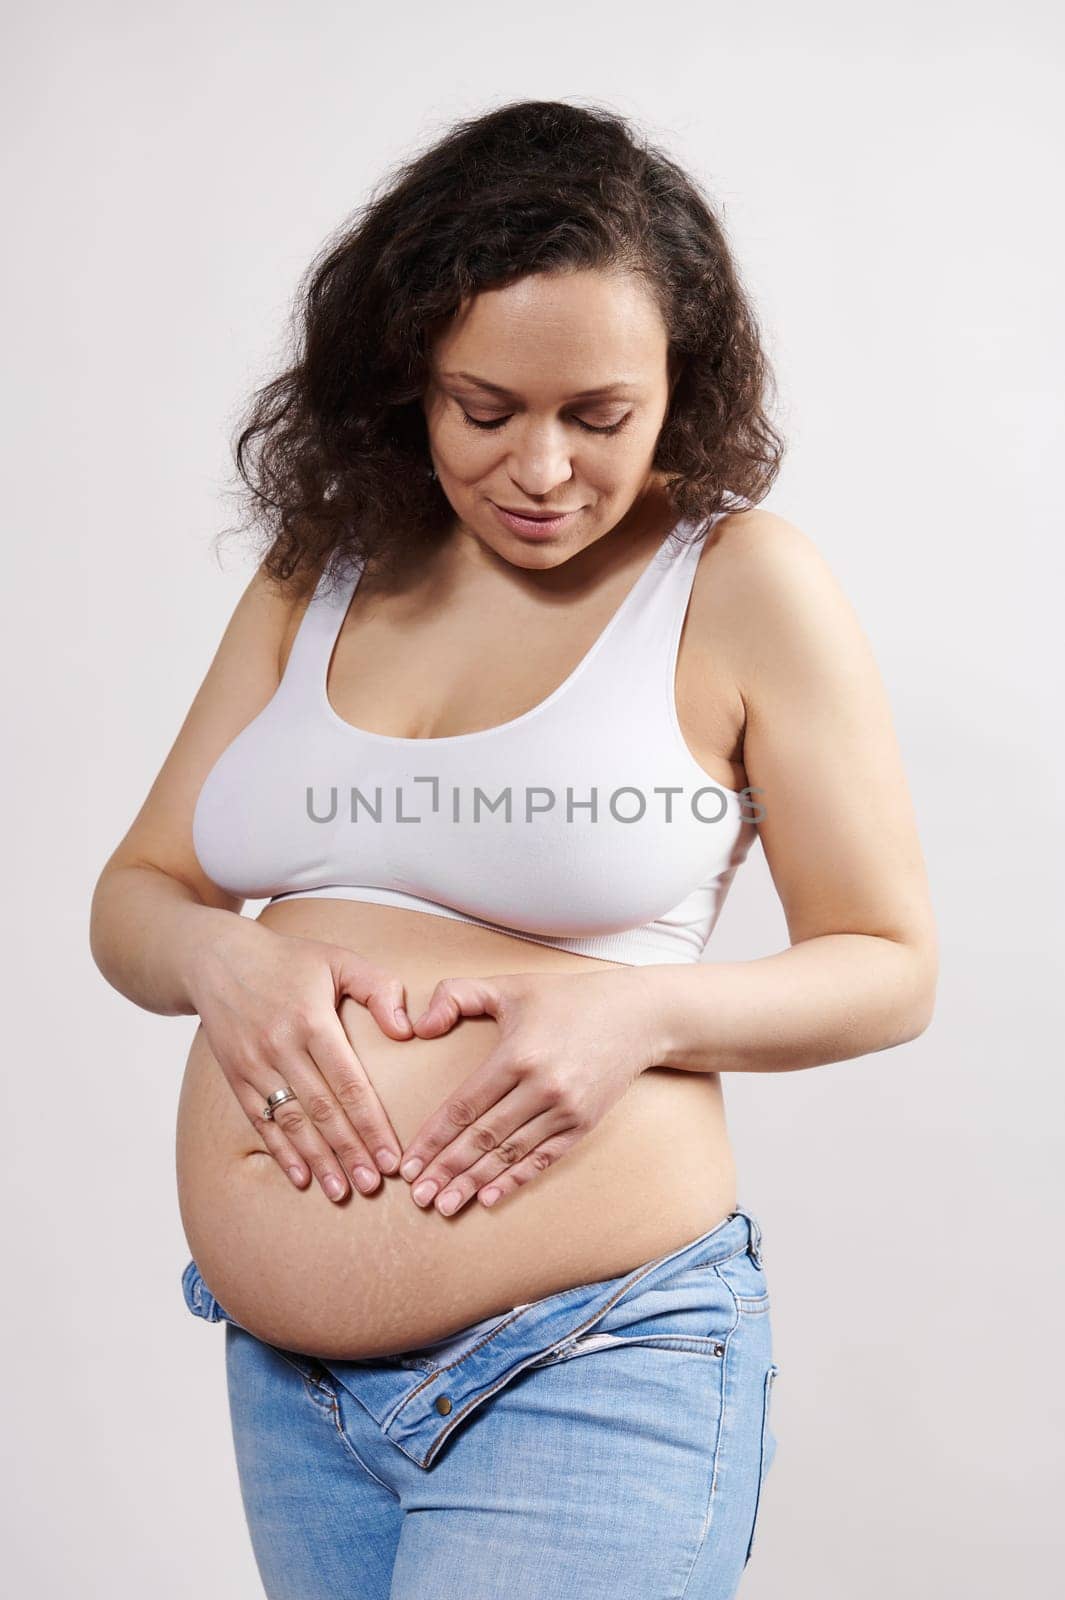 Pregnant woman in white underwear and denim jeans, putting her hands on her belly, making heart shape, isolated on white by artgf